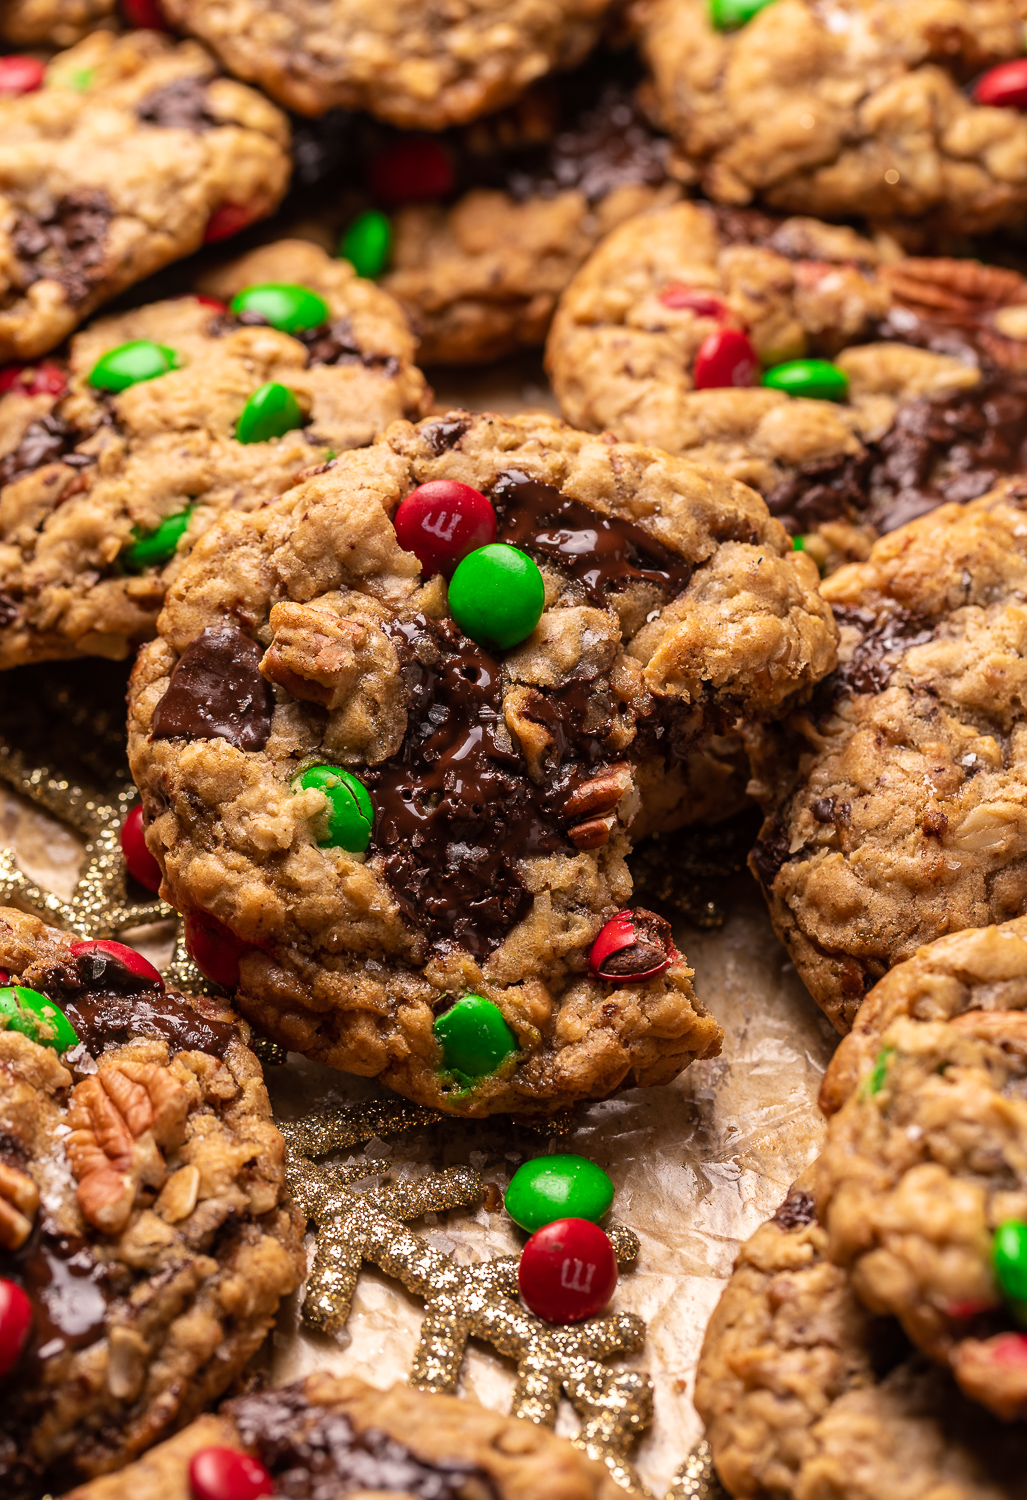 These Special Edition Christmas Cowboy Cookies are loaded with chocolate, pecans, shredded coconut, toffee, and holiday M&Ms!